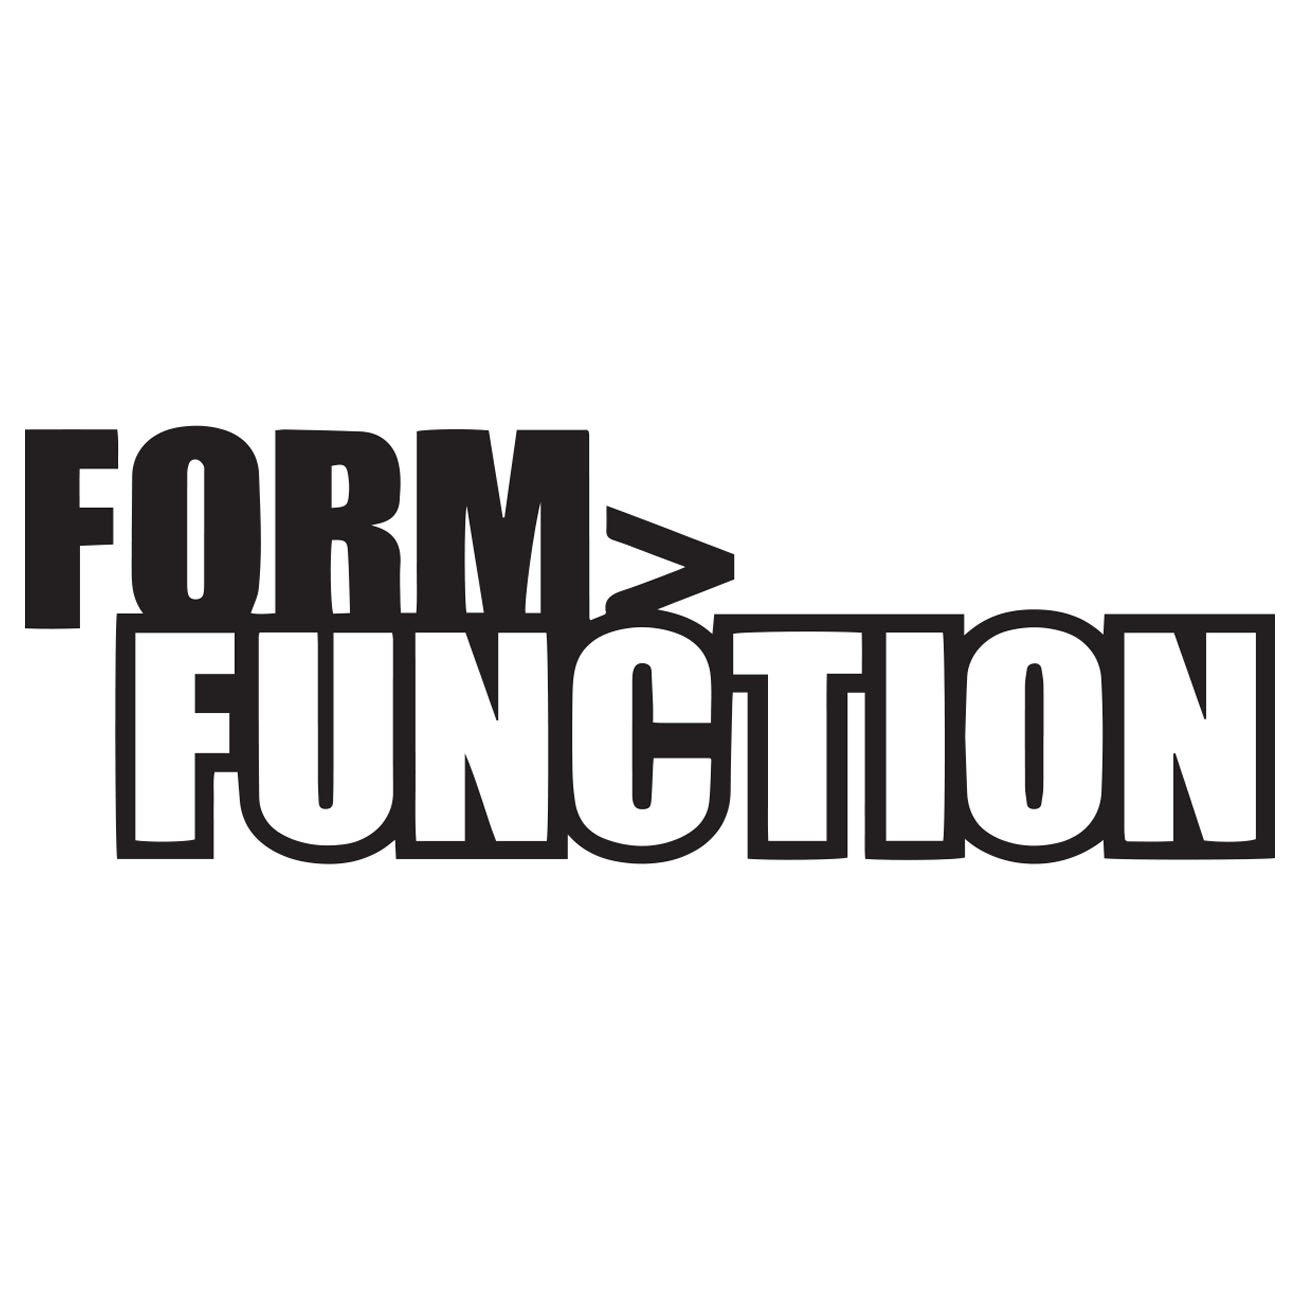 Form over function